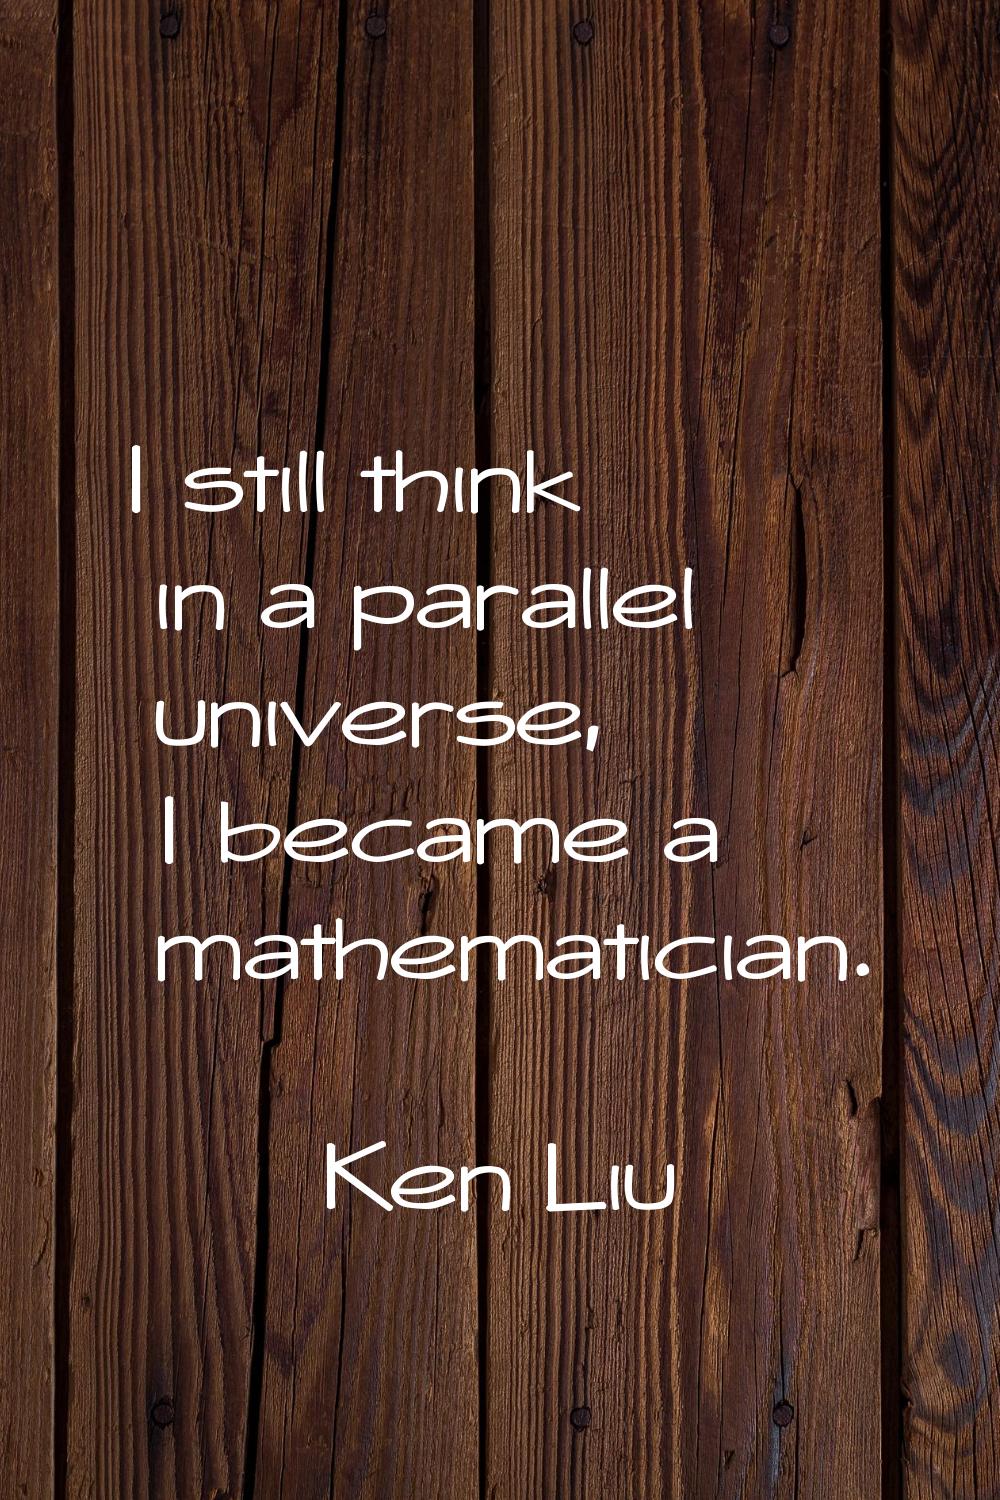 I still think in a parallel universe, I became a mathematician.